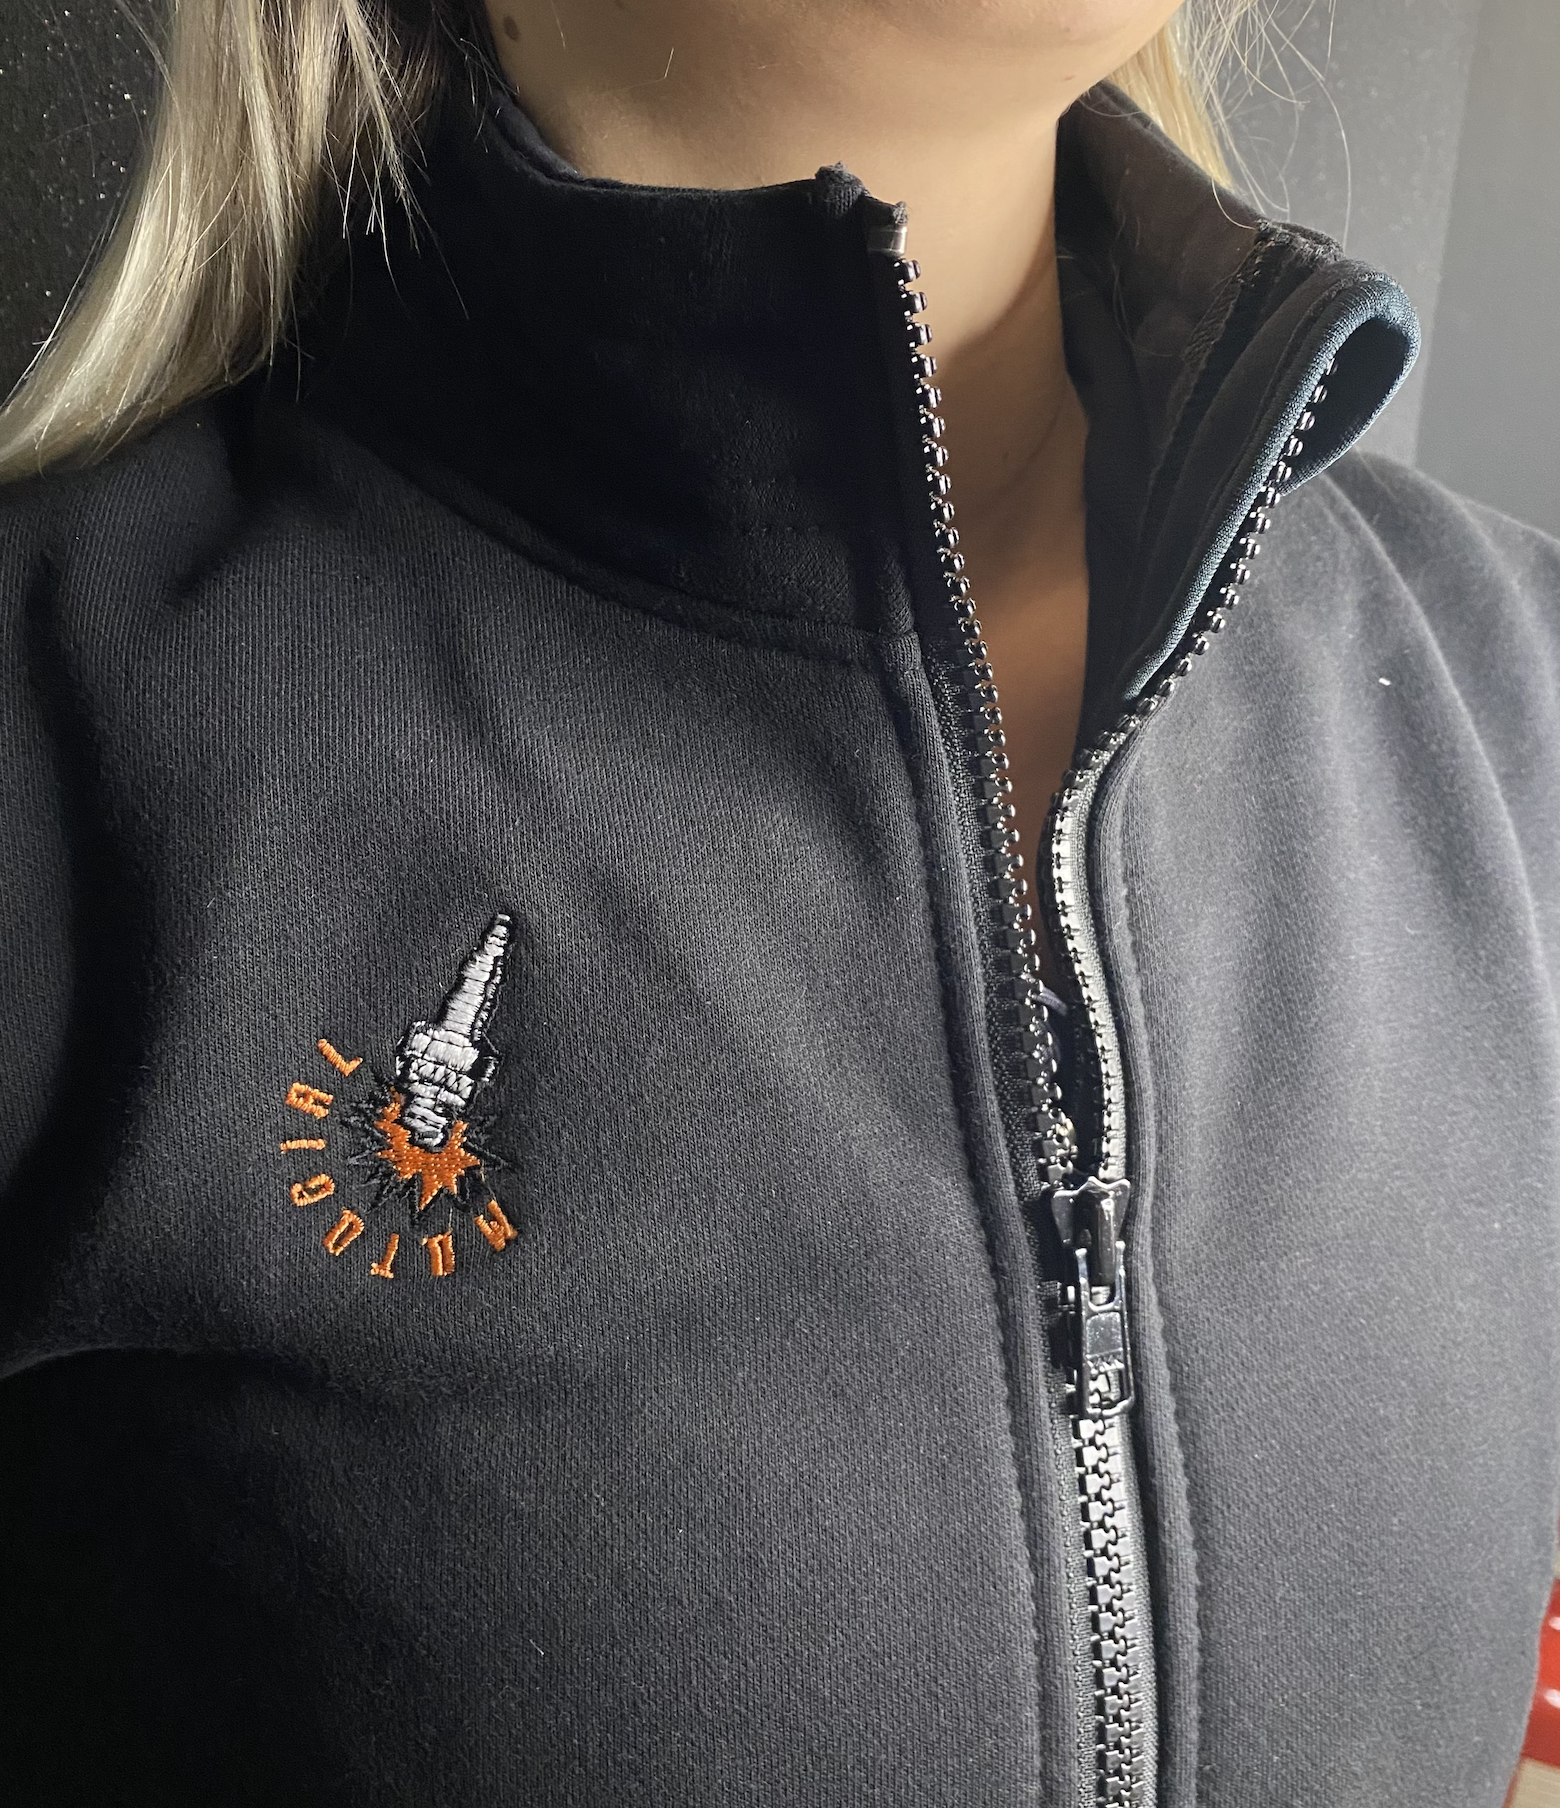 a close up of a woman's neck wearing black sweatshirt with a zip and MotoGirl embroidery 